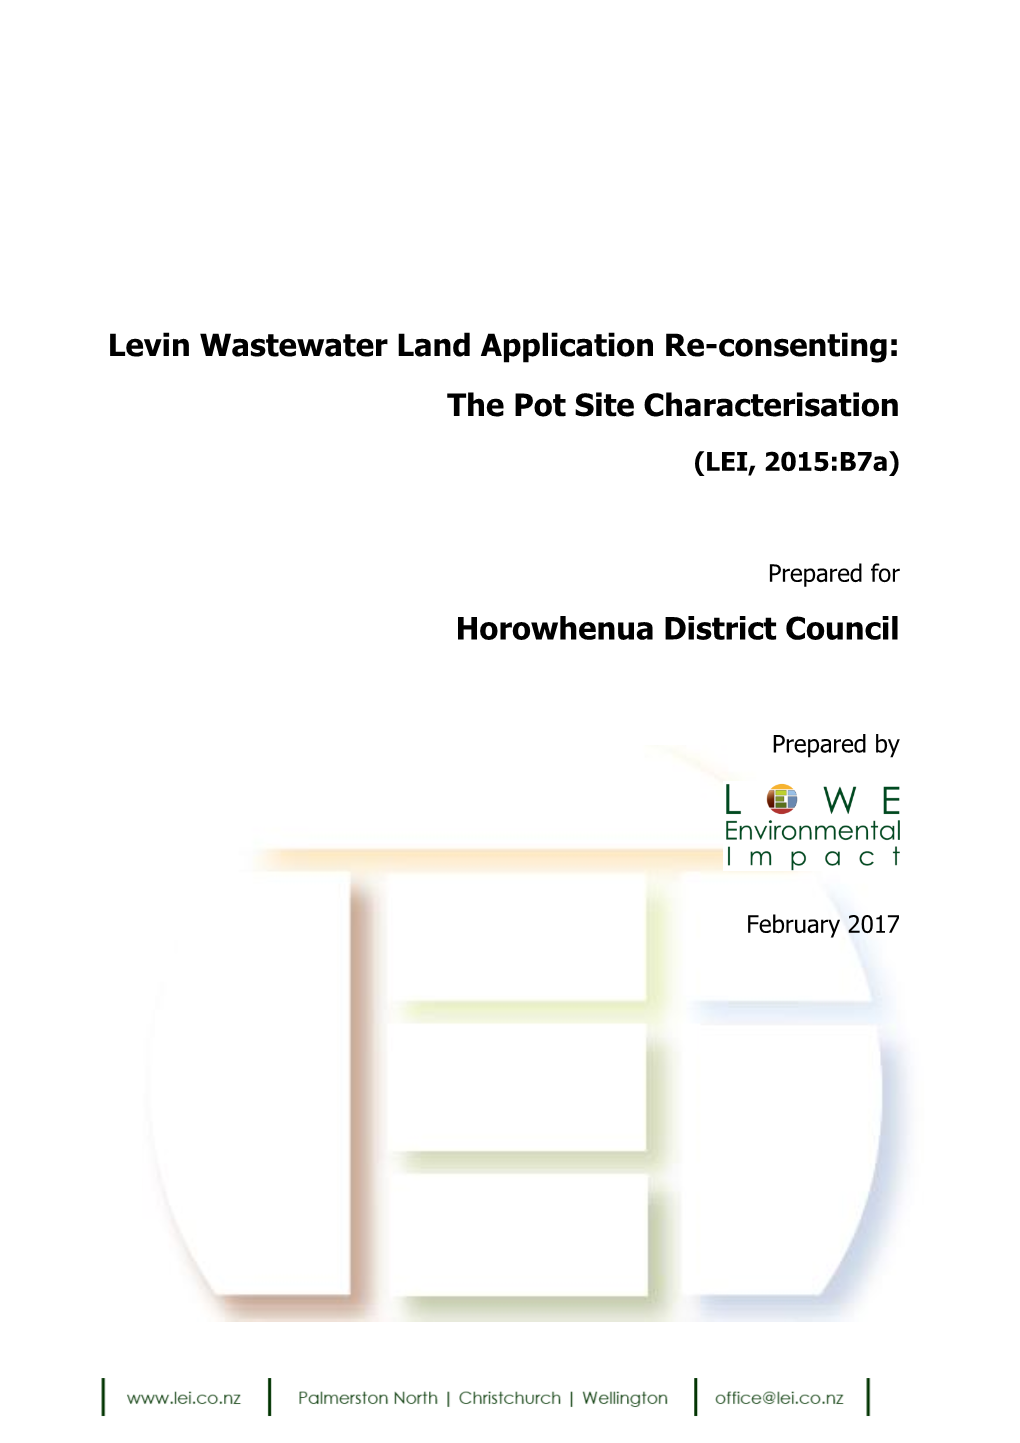 Levin Wastewater Land Application Re-Consenting